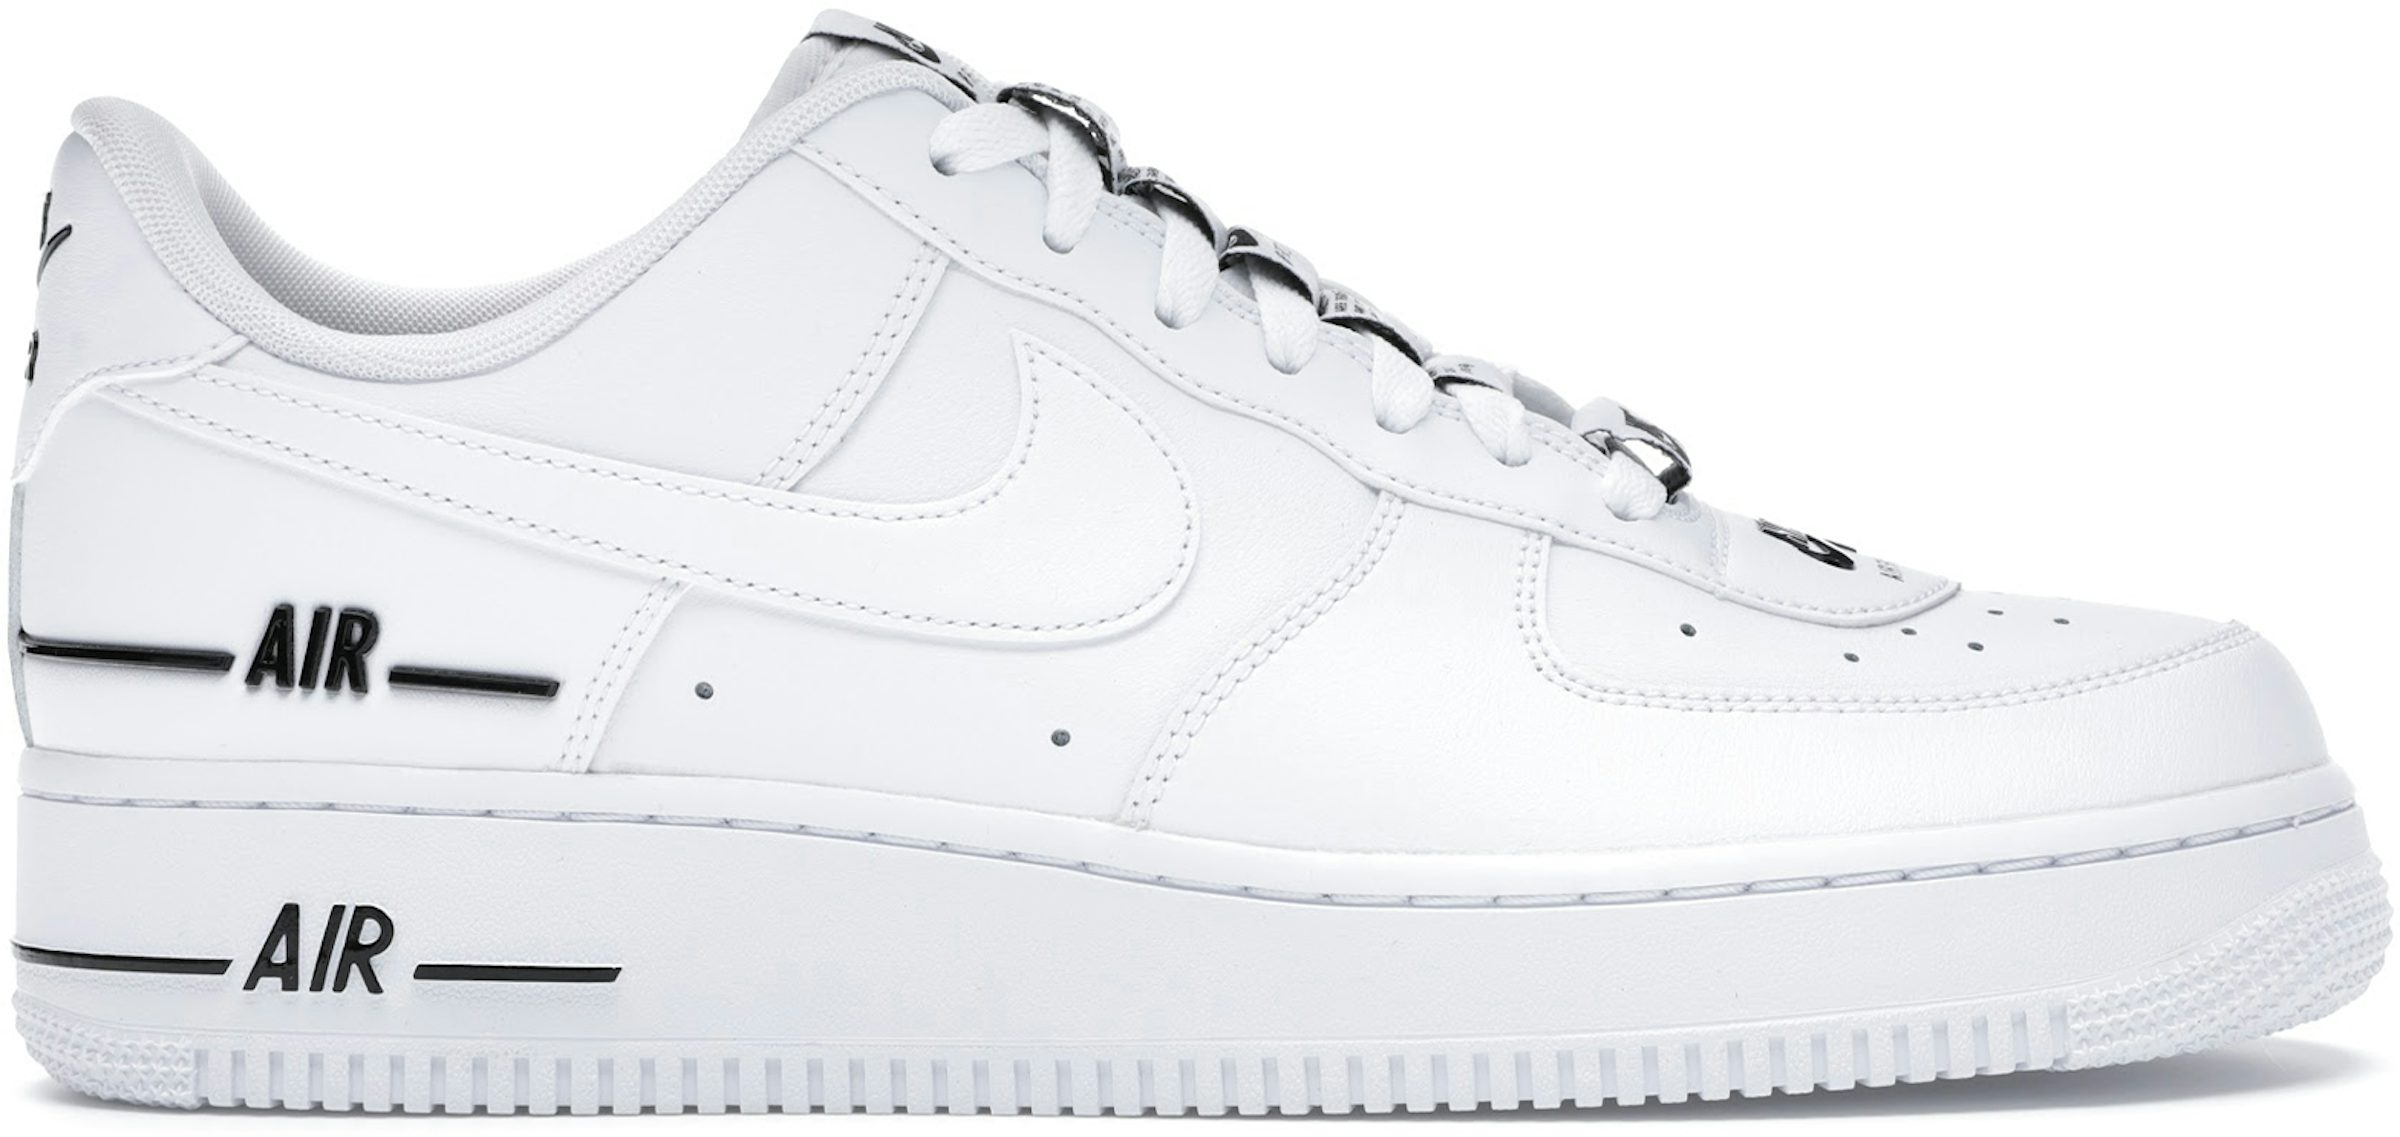 Nike Air Force 1 LV8 PS Double Swoosh